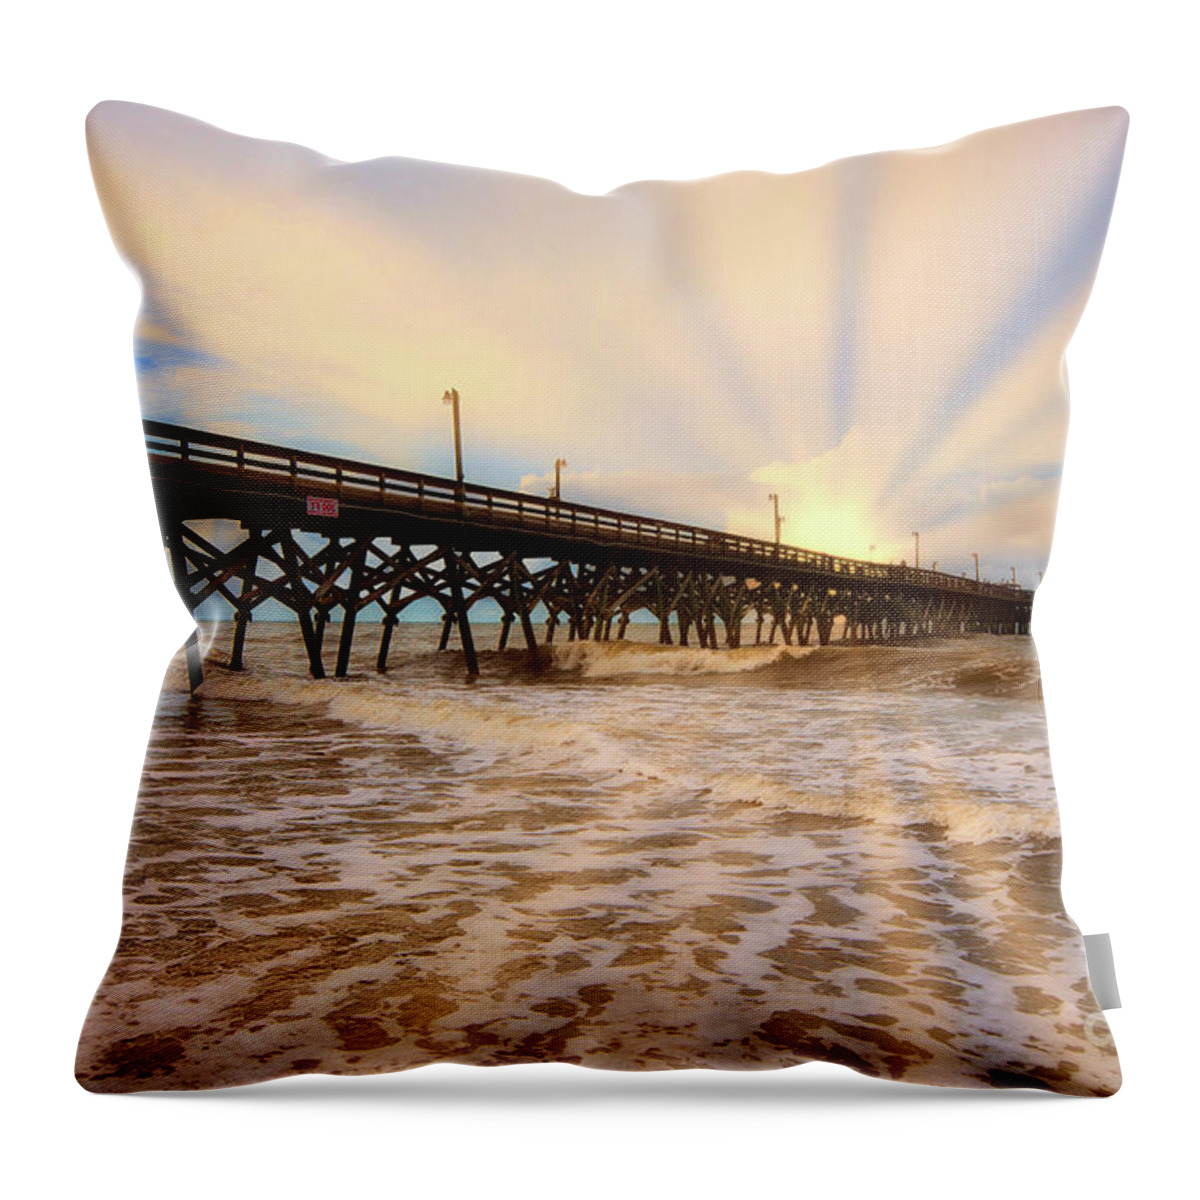 Scenic Throw Pillow featuring the photograph The Glow Of Sunrise by Kathy Baccari